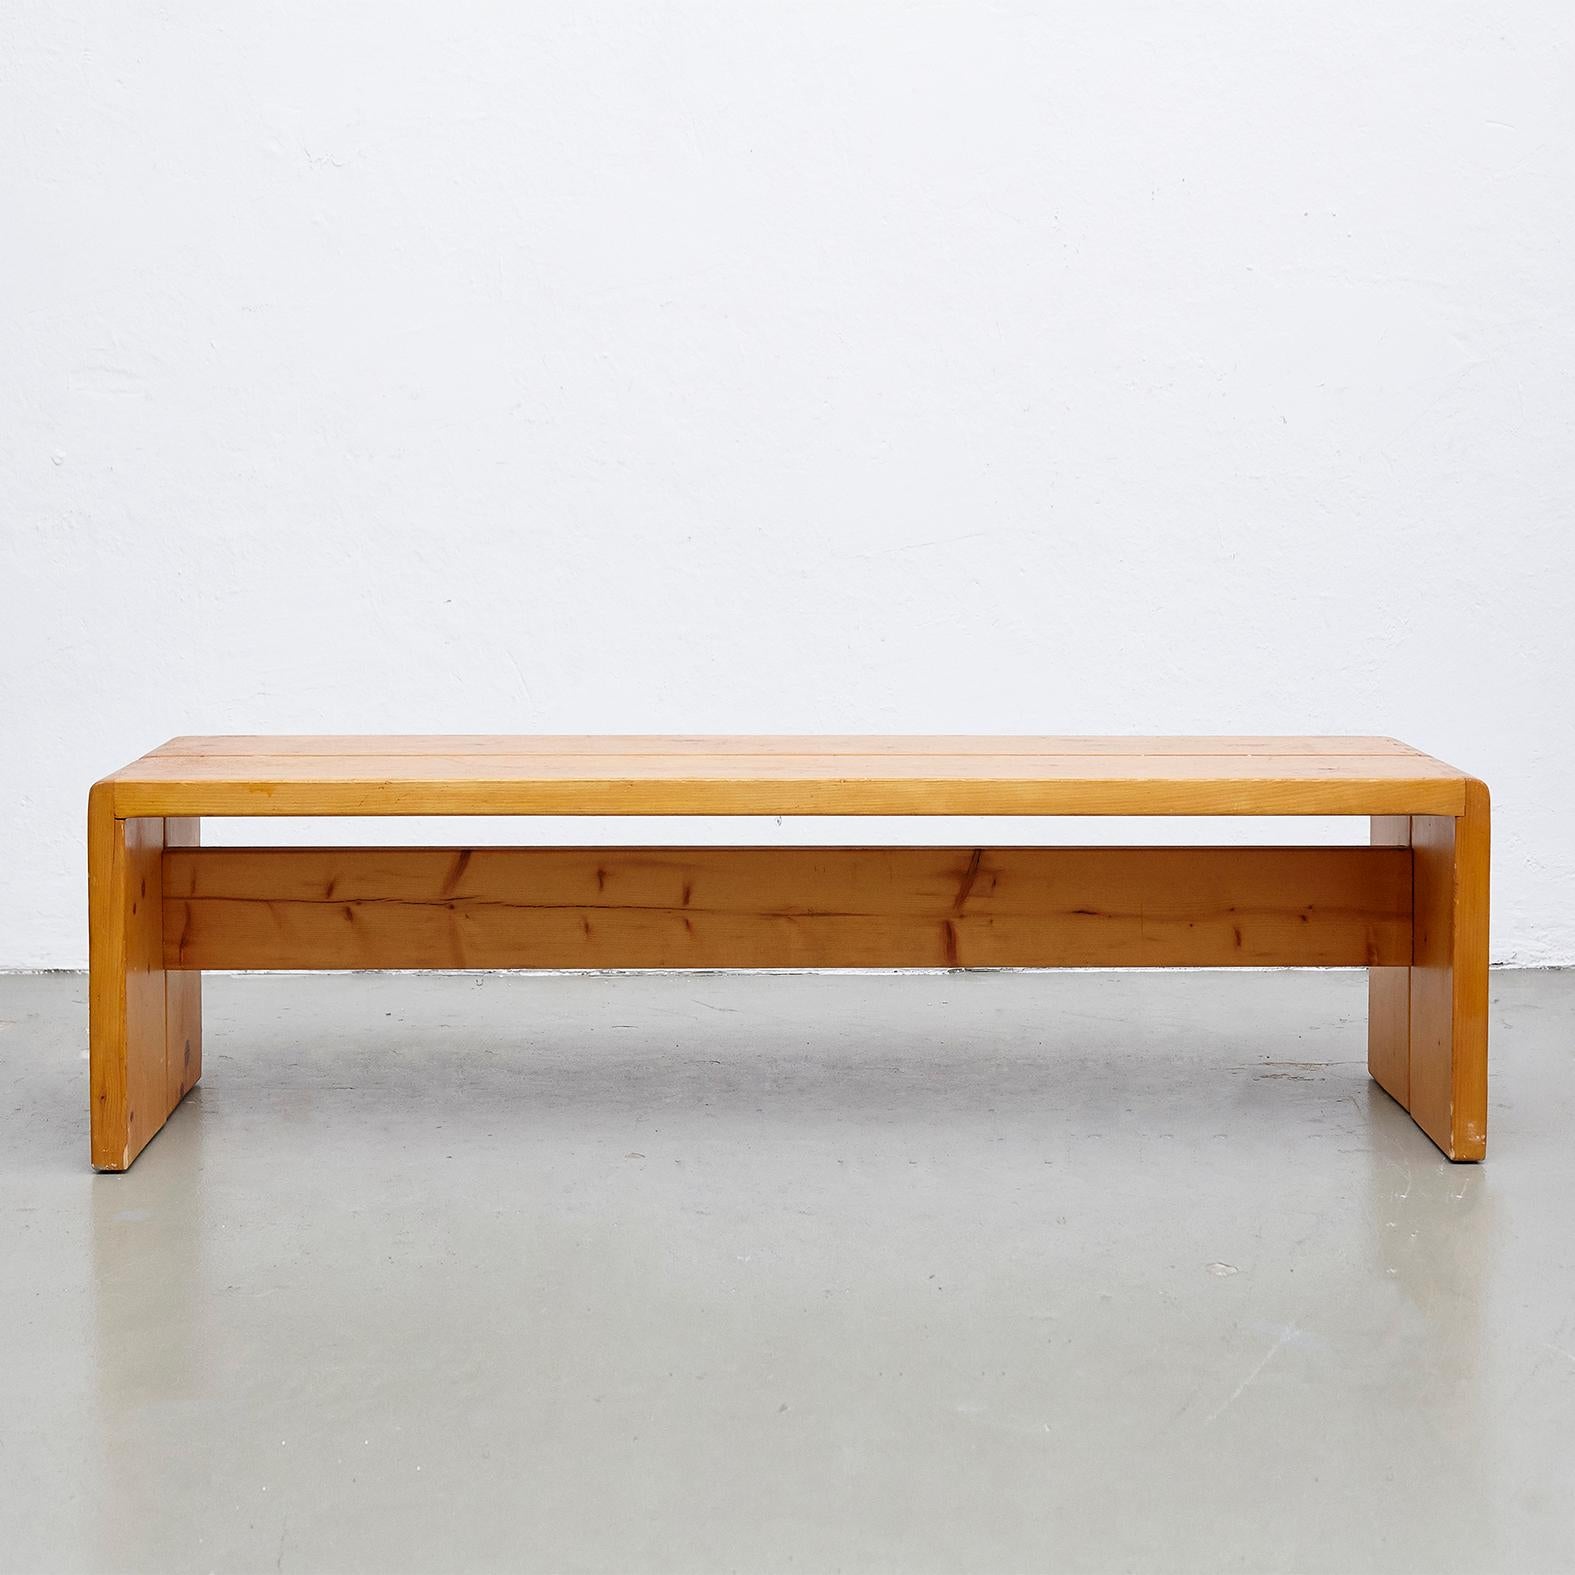 Mid-20th Century Charlotte Perriand, Mid Century Modern Large Wood Bench for Les Arcs, circa 1960